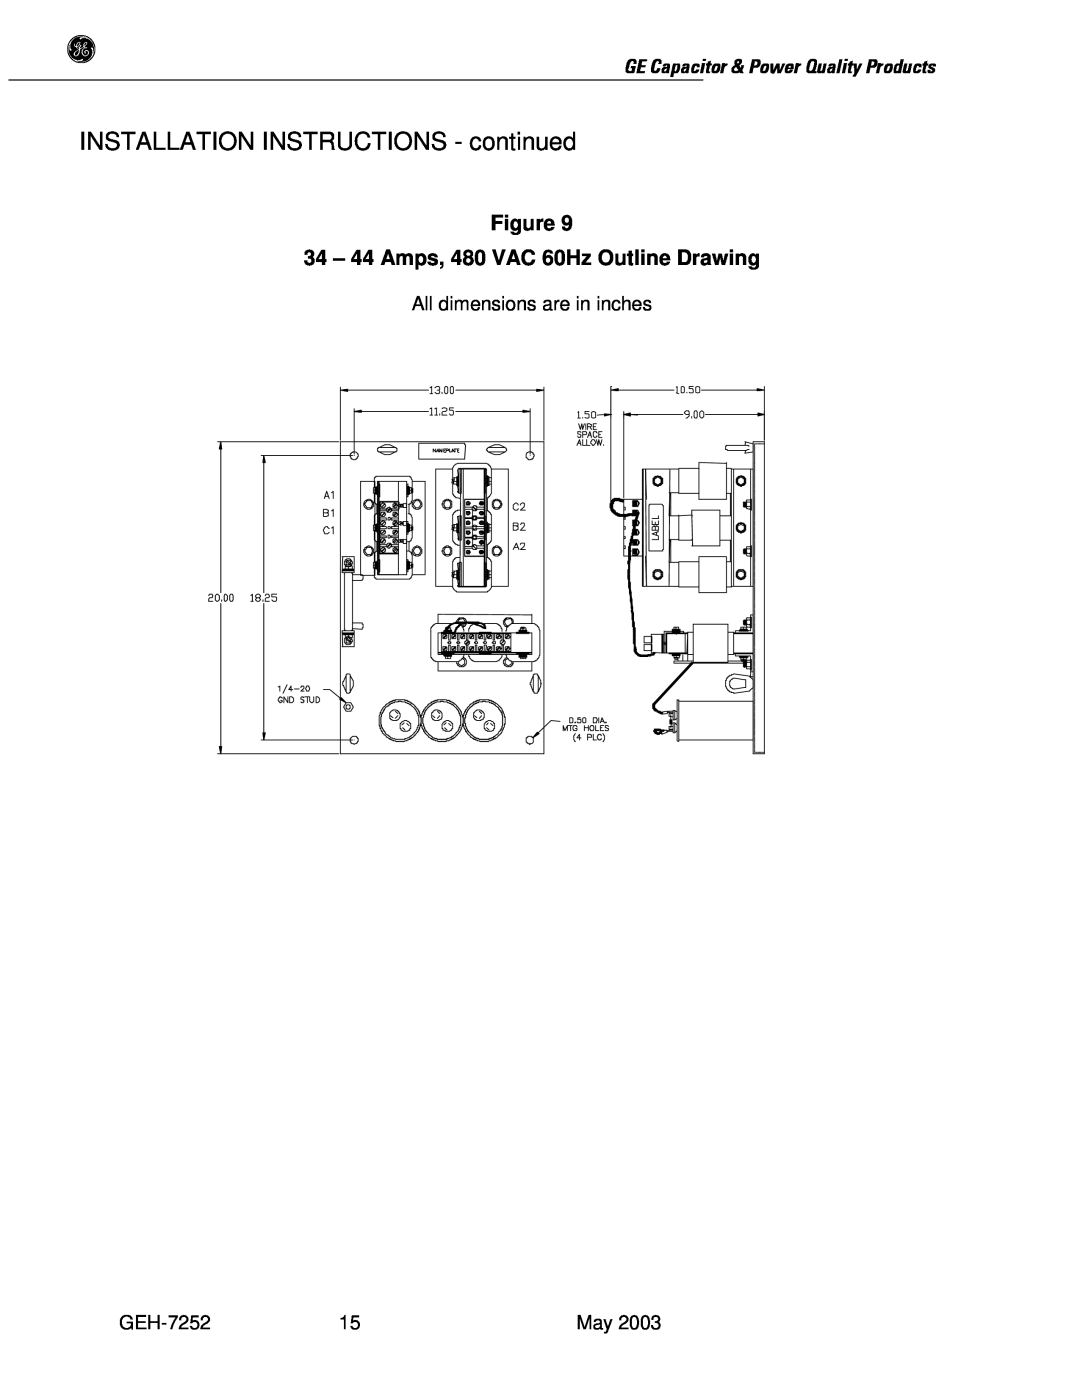 GE SERIES B 480 44 Amps, 480 VAC 60Hz Outline Drawing, INSTALLATION INSTRUCTIONS - continued, All dimensions are in inches 